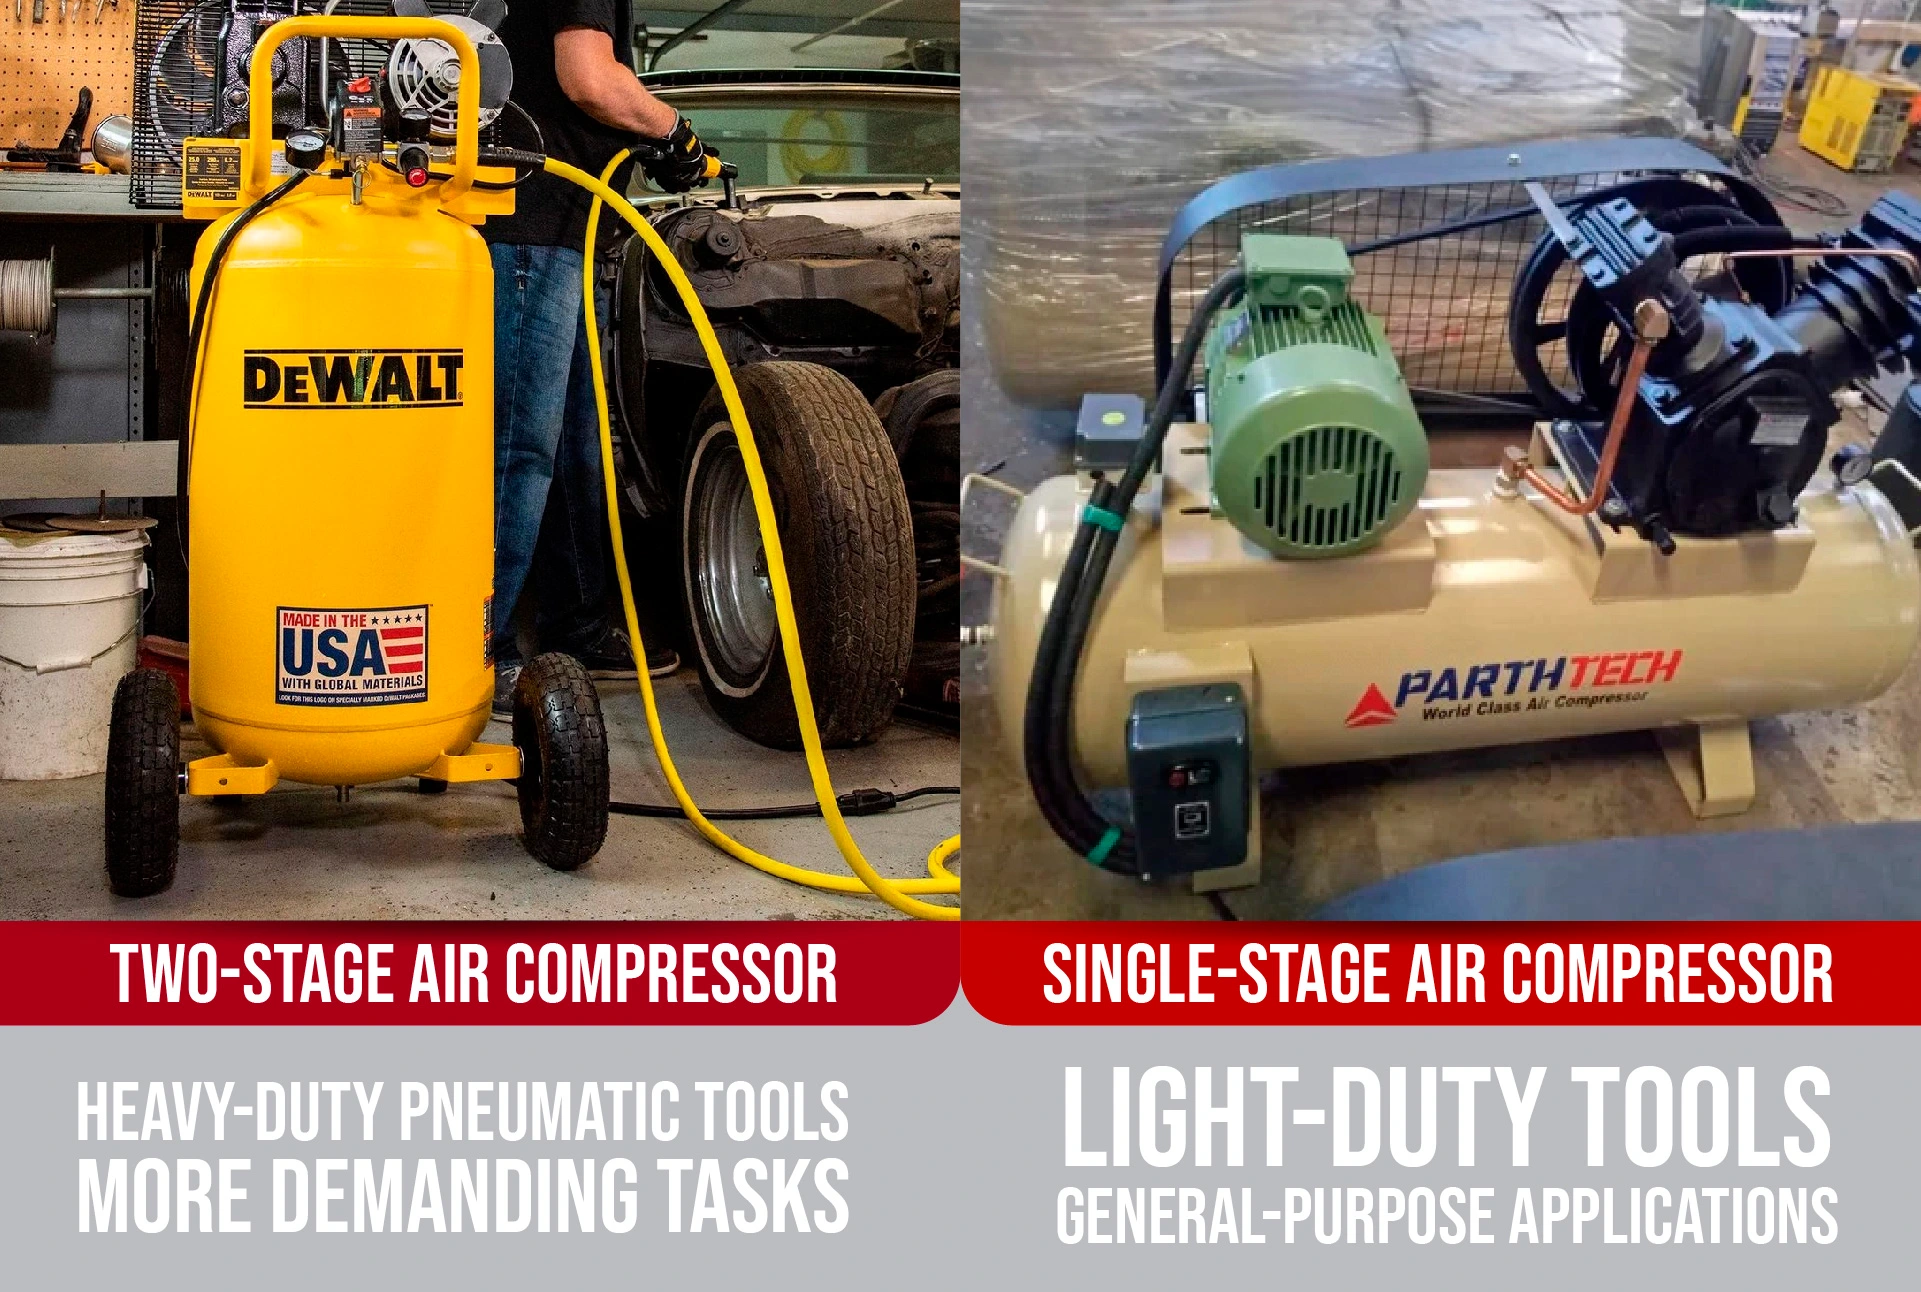 A comparison of two-stage and single-stage air compressors